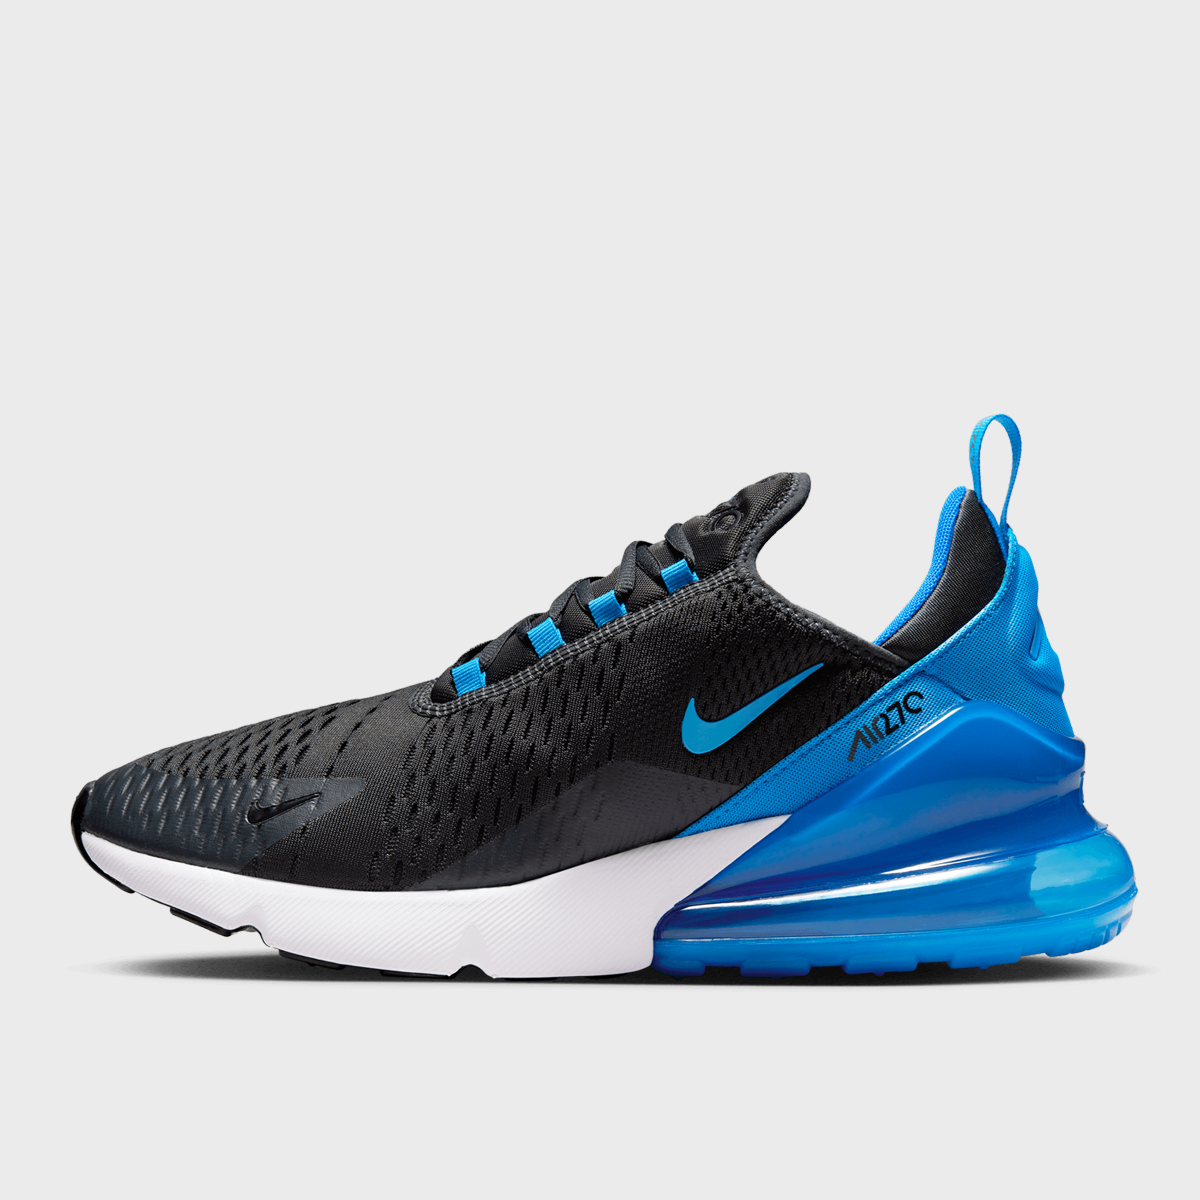 Air Max 270, NIKE, Footwear, anthracite/blue-black-white, taille: 44